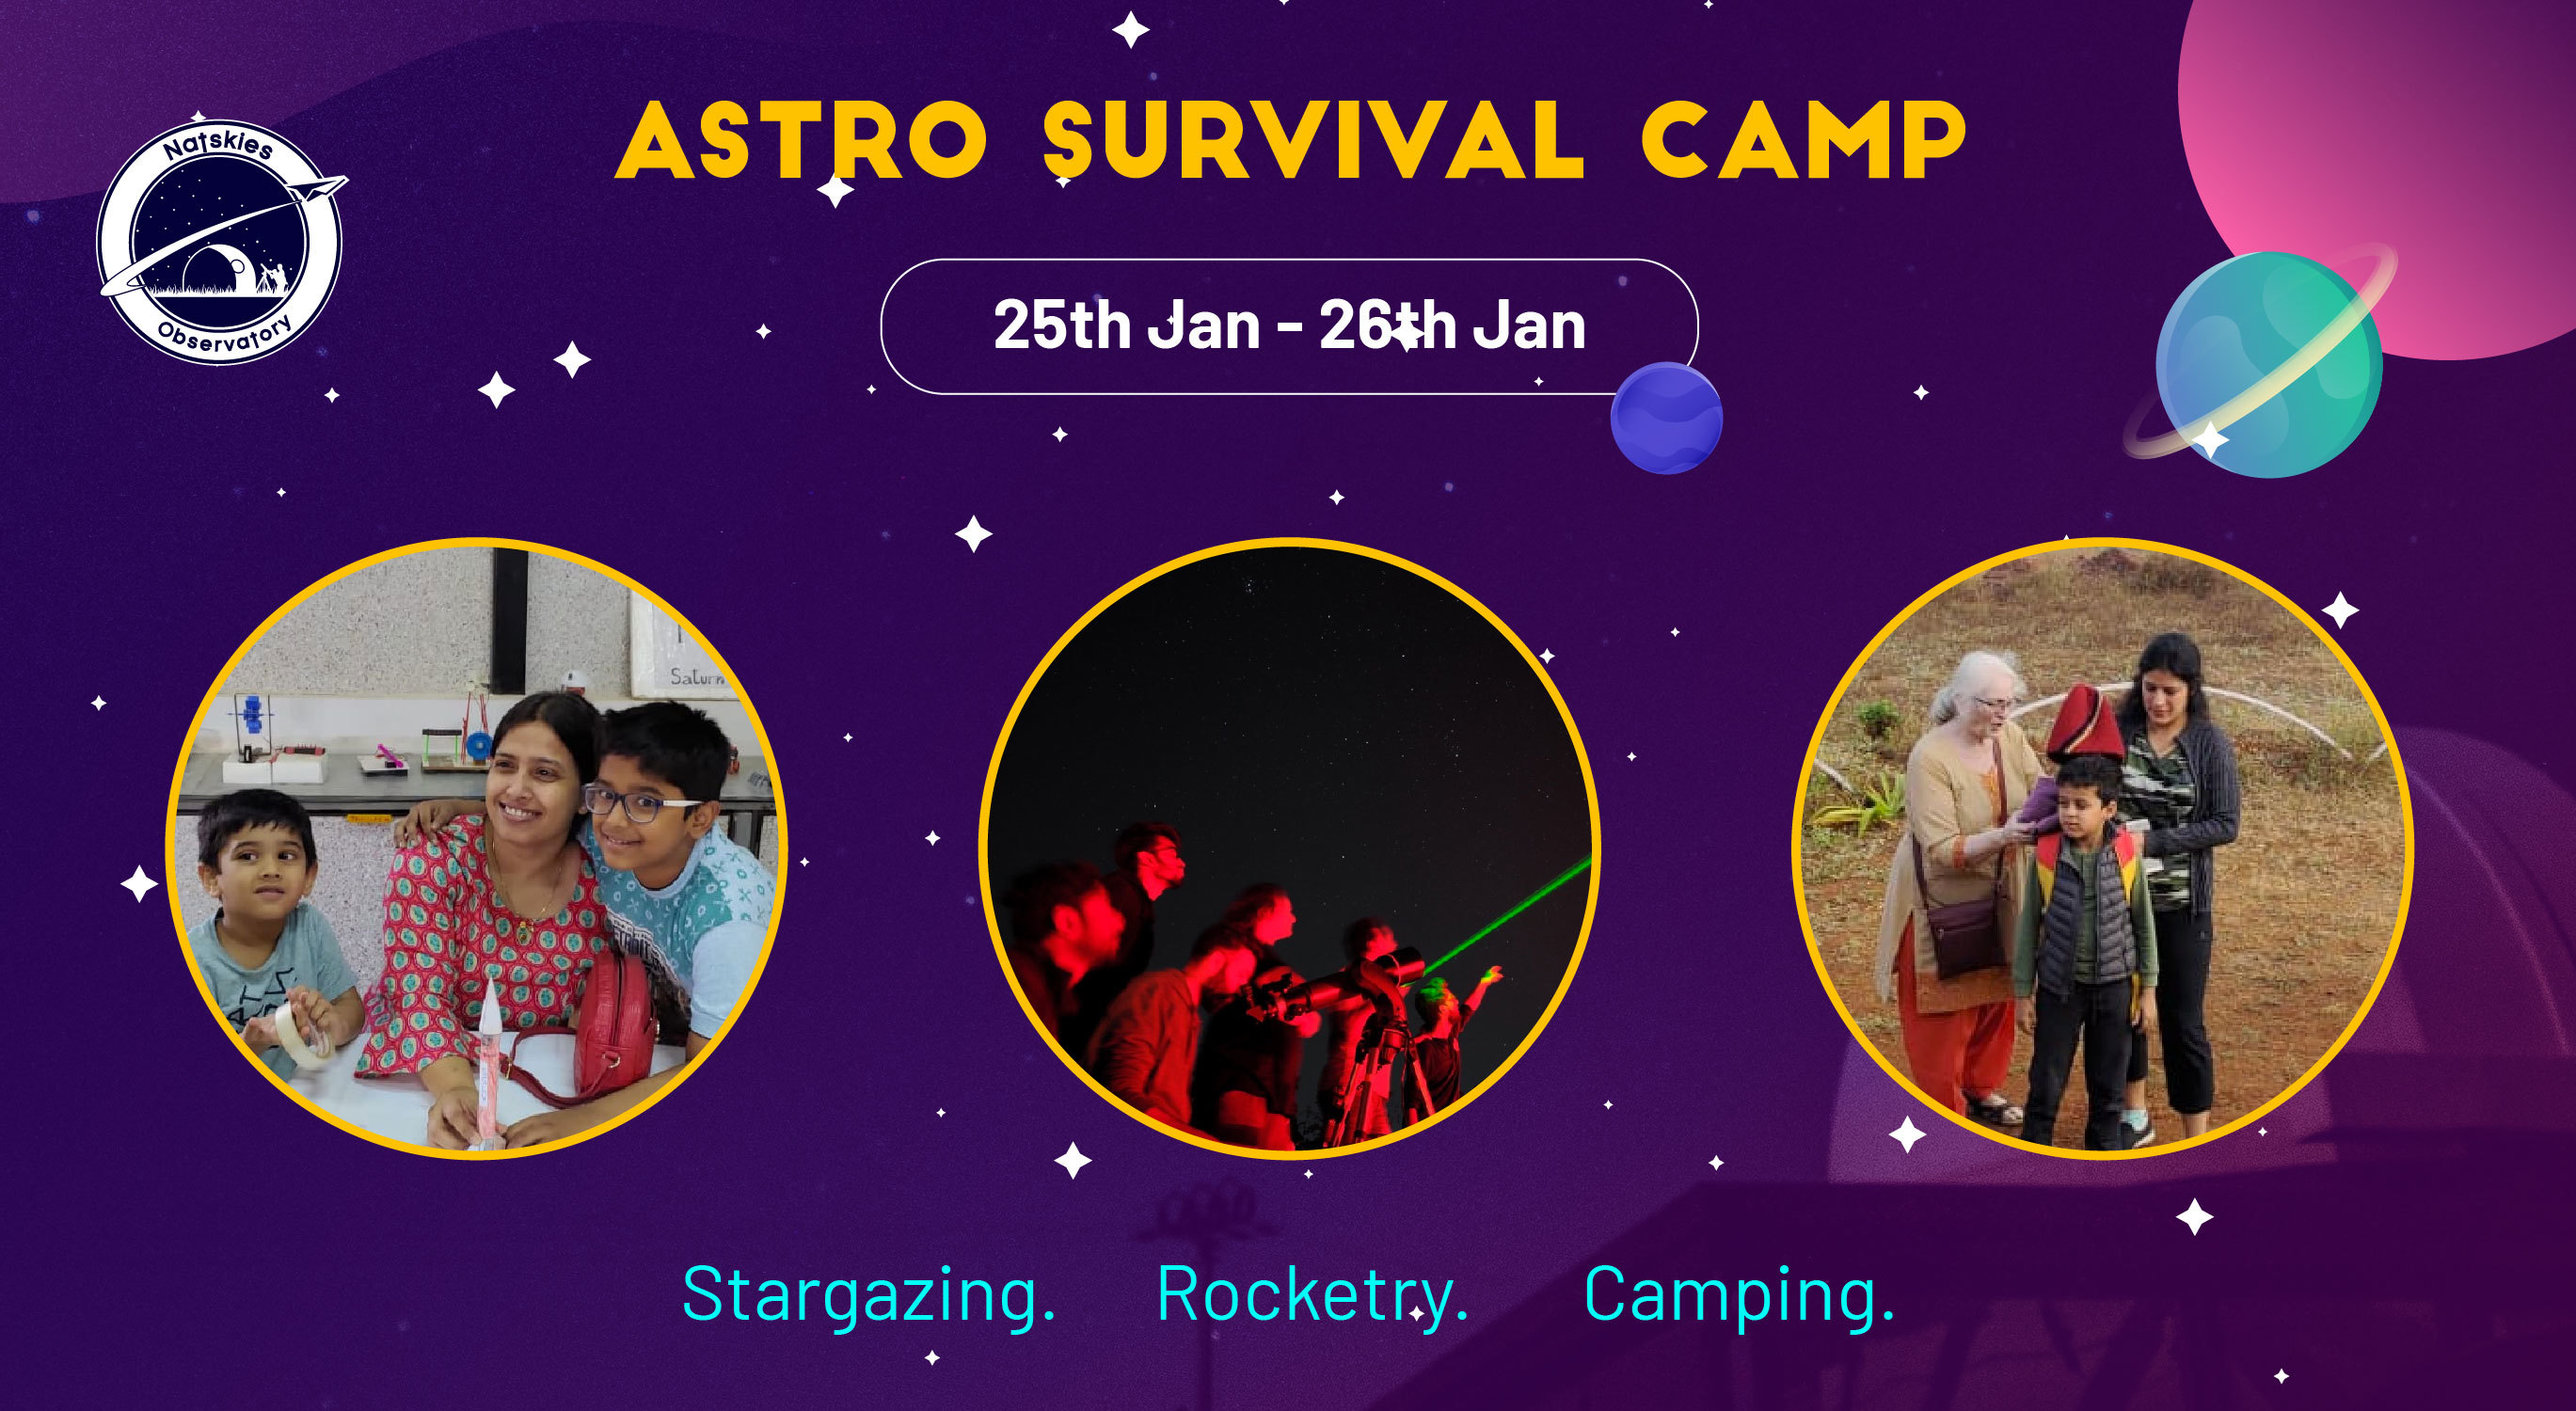 Astro Survival Camp by Natskies